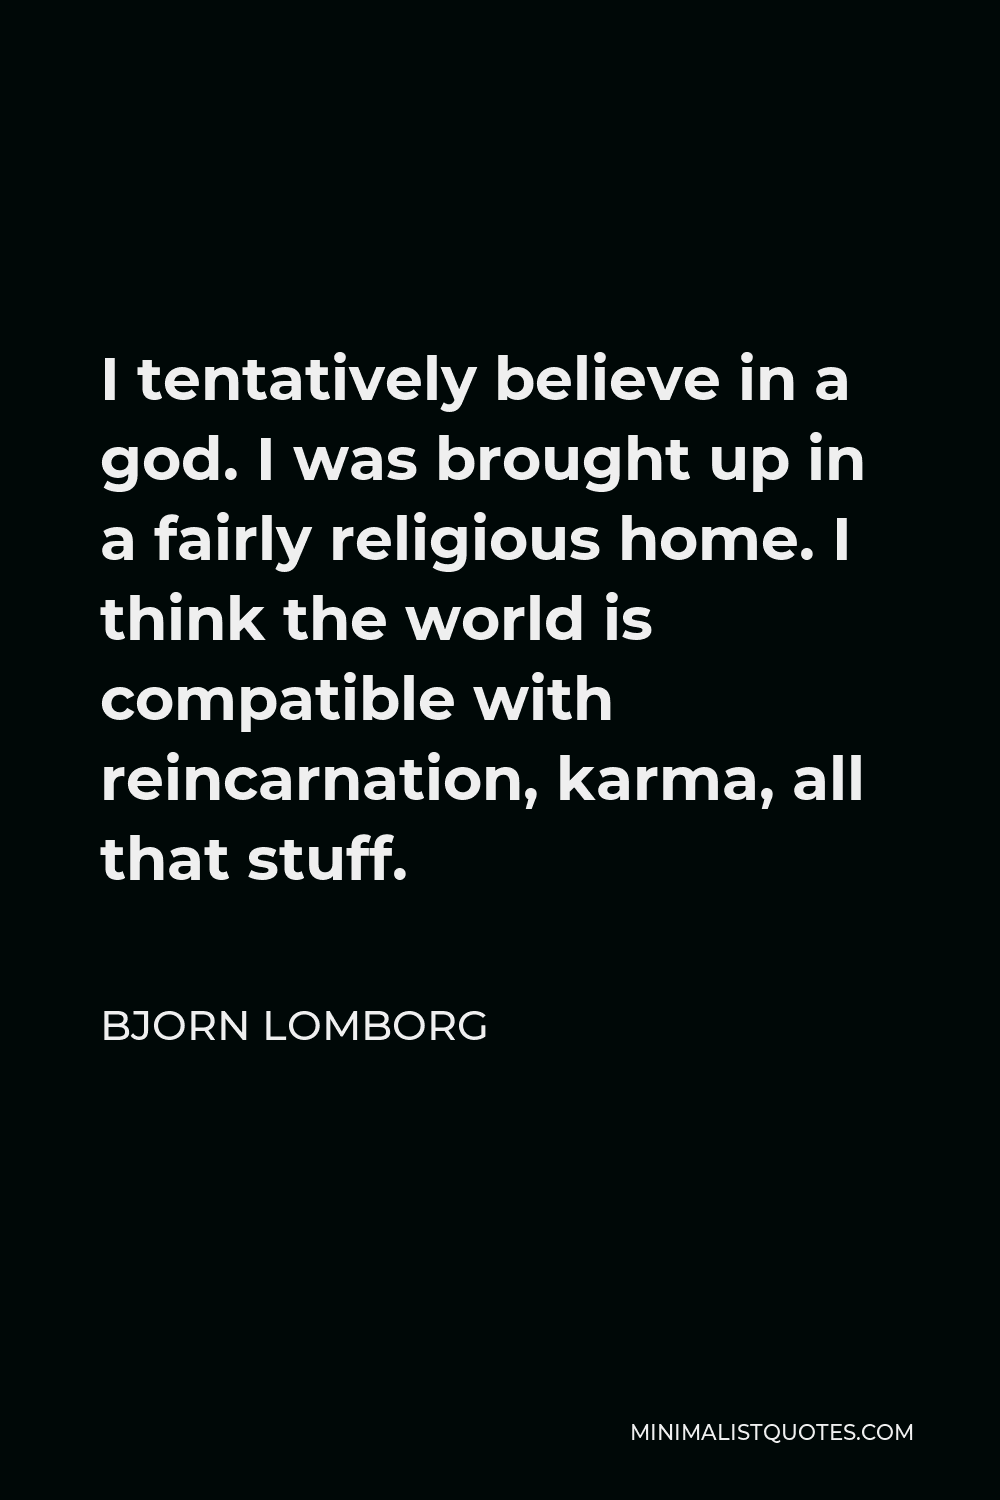 Bjorn Lomborg Quote - I tentatively believe in a god. I was brought up in a fairly religious home. I think the world is compatible with reincarnation, karma, all that stuff.